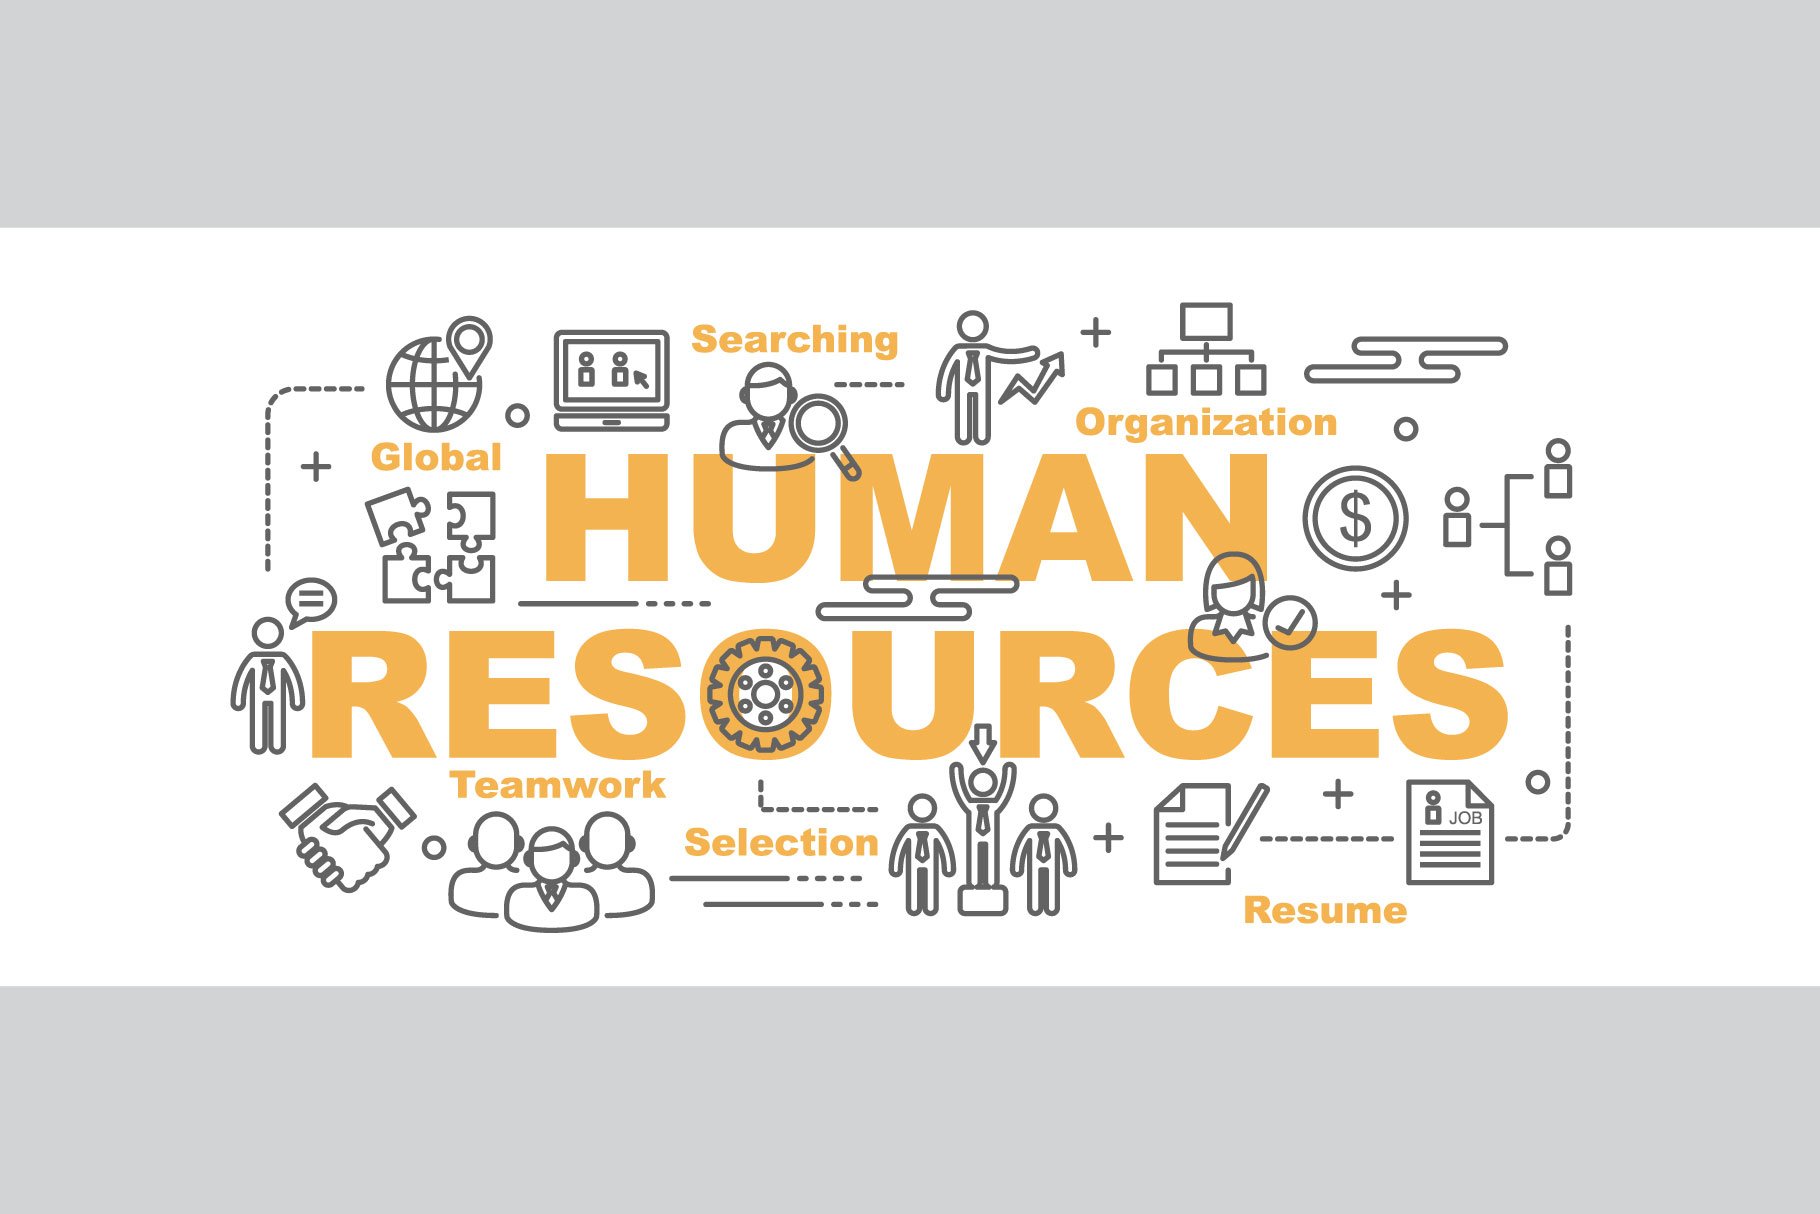 Human Resources Outline Icons Banner cover image.